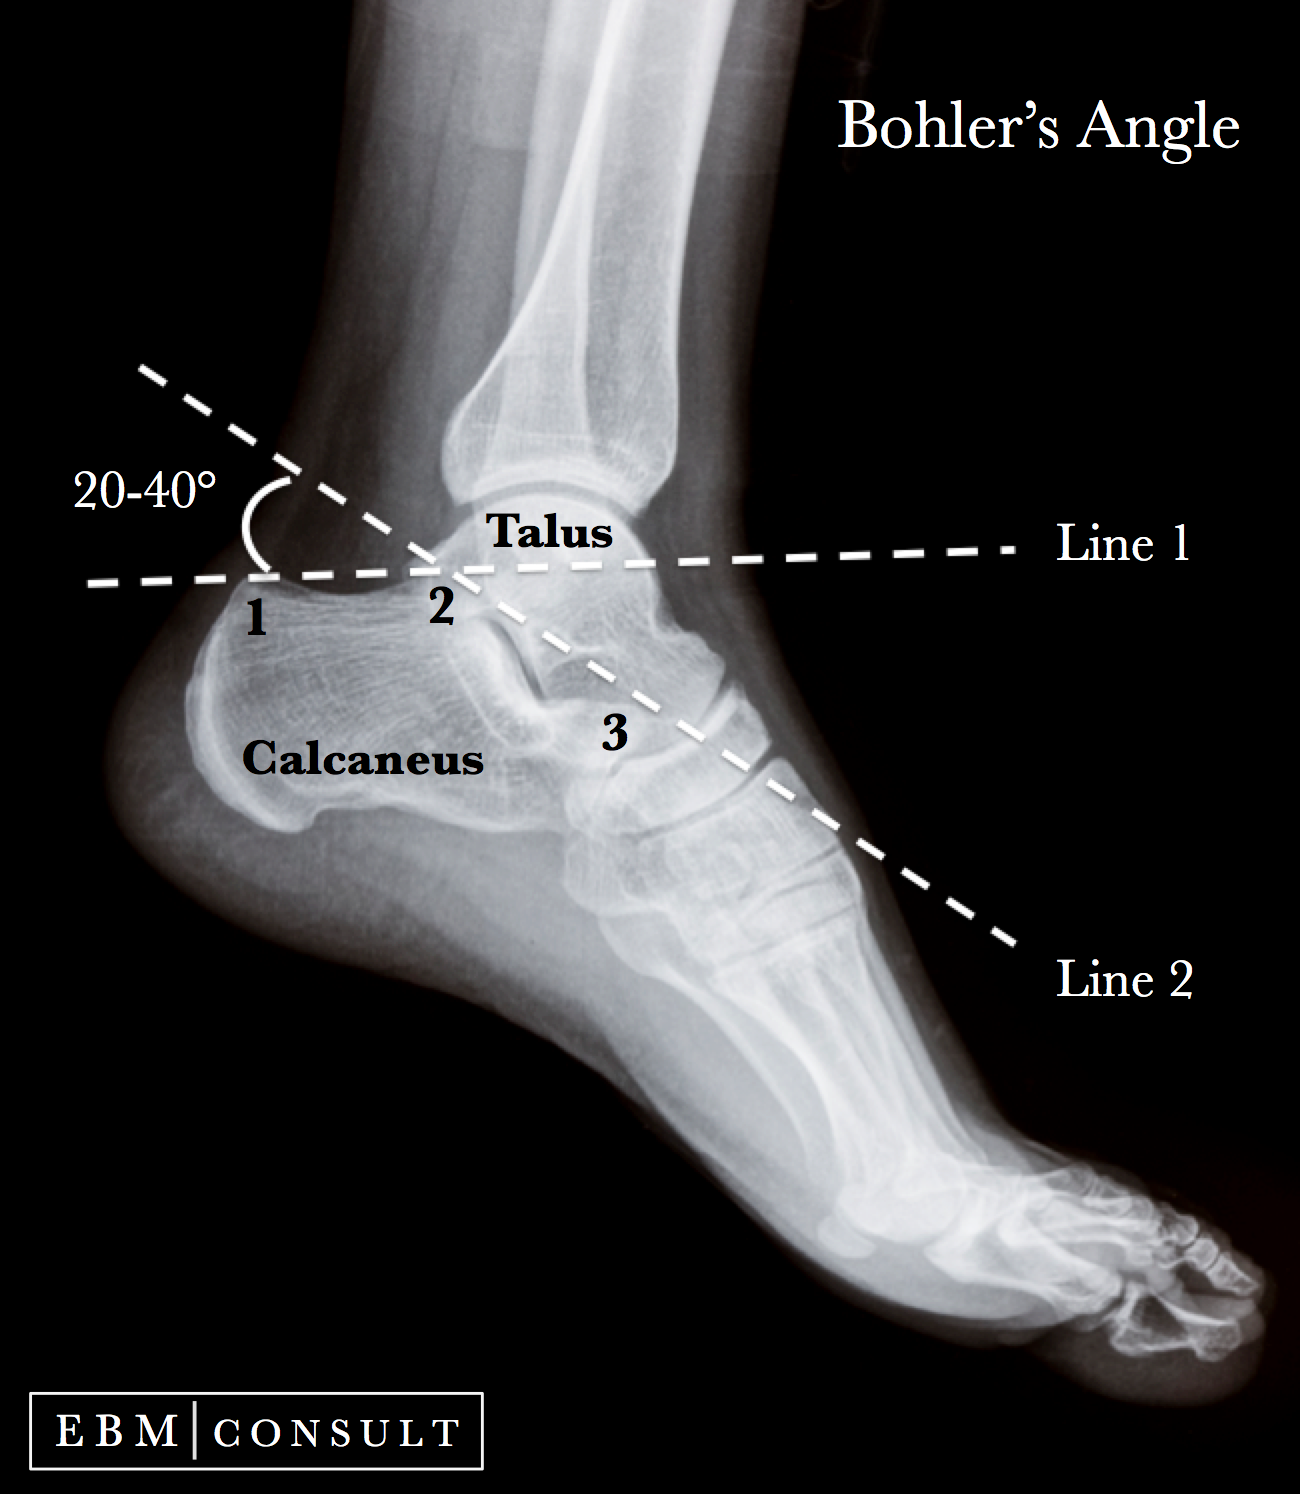 Bohlers Angle on Xray for Calcaneus Fractures